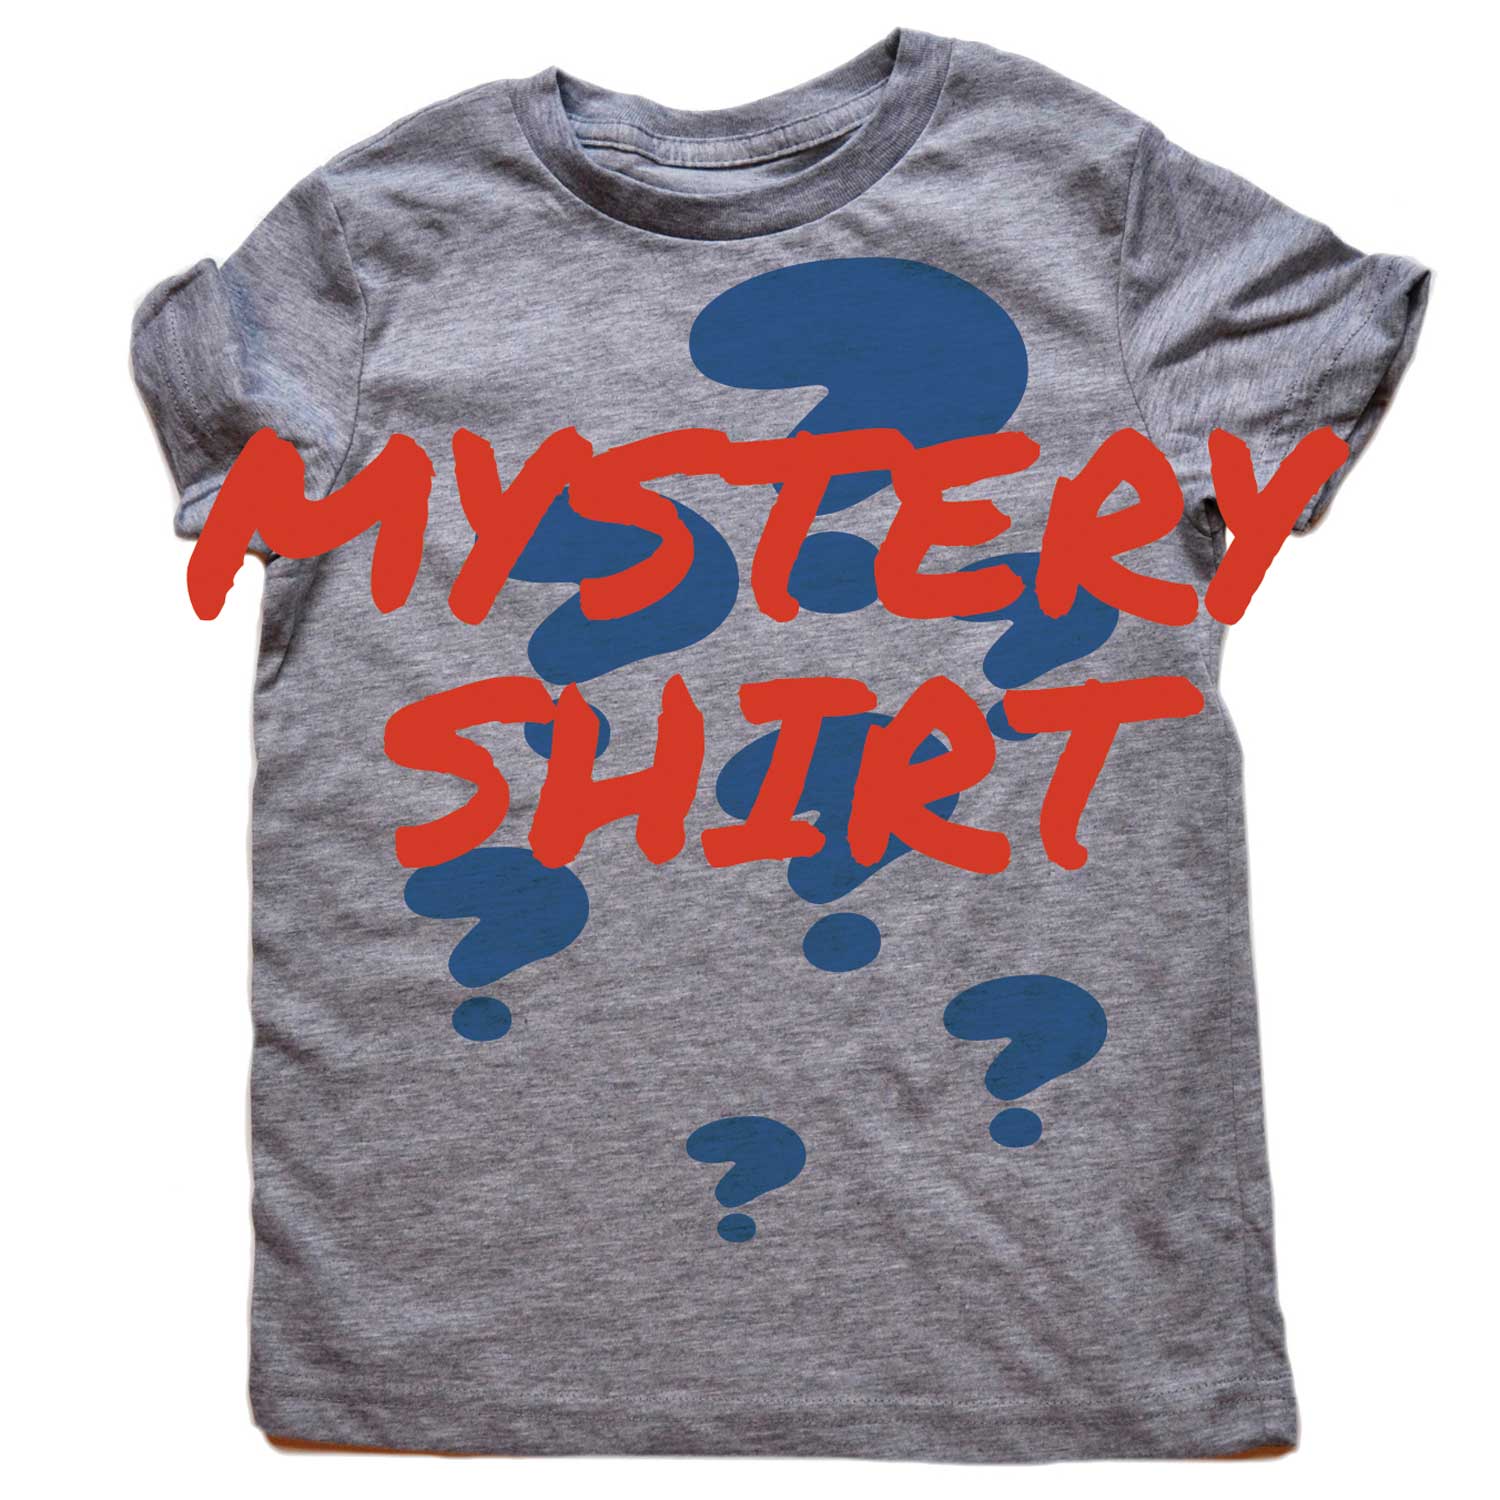 Kid's Mystery Retro Graphic T-Shirt With Slight Defect | Cool Tee Surprise Design | Solid Threads